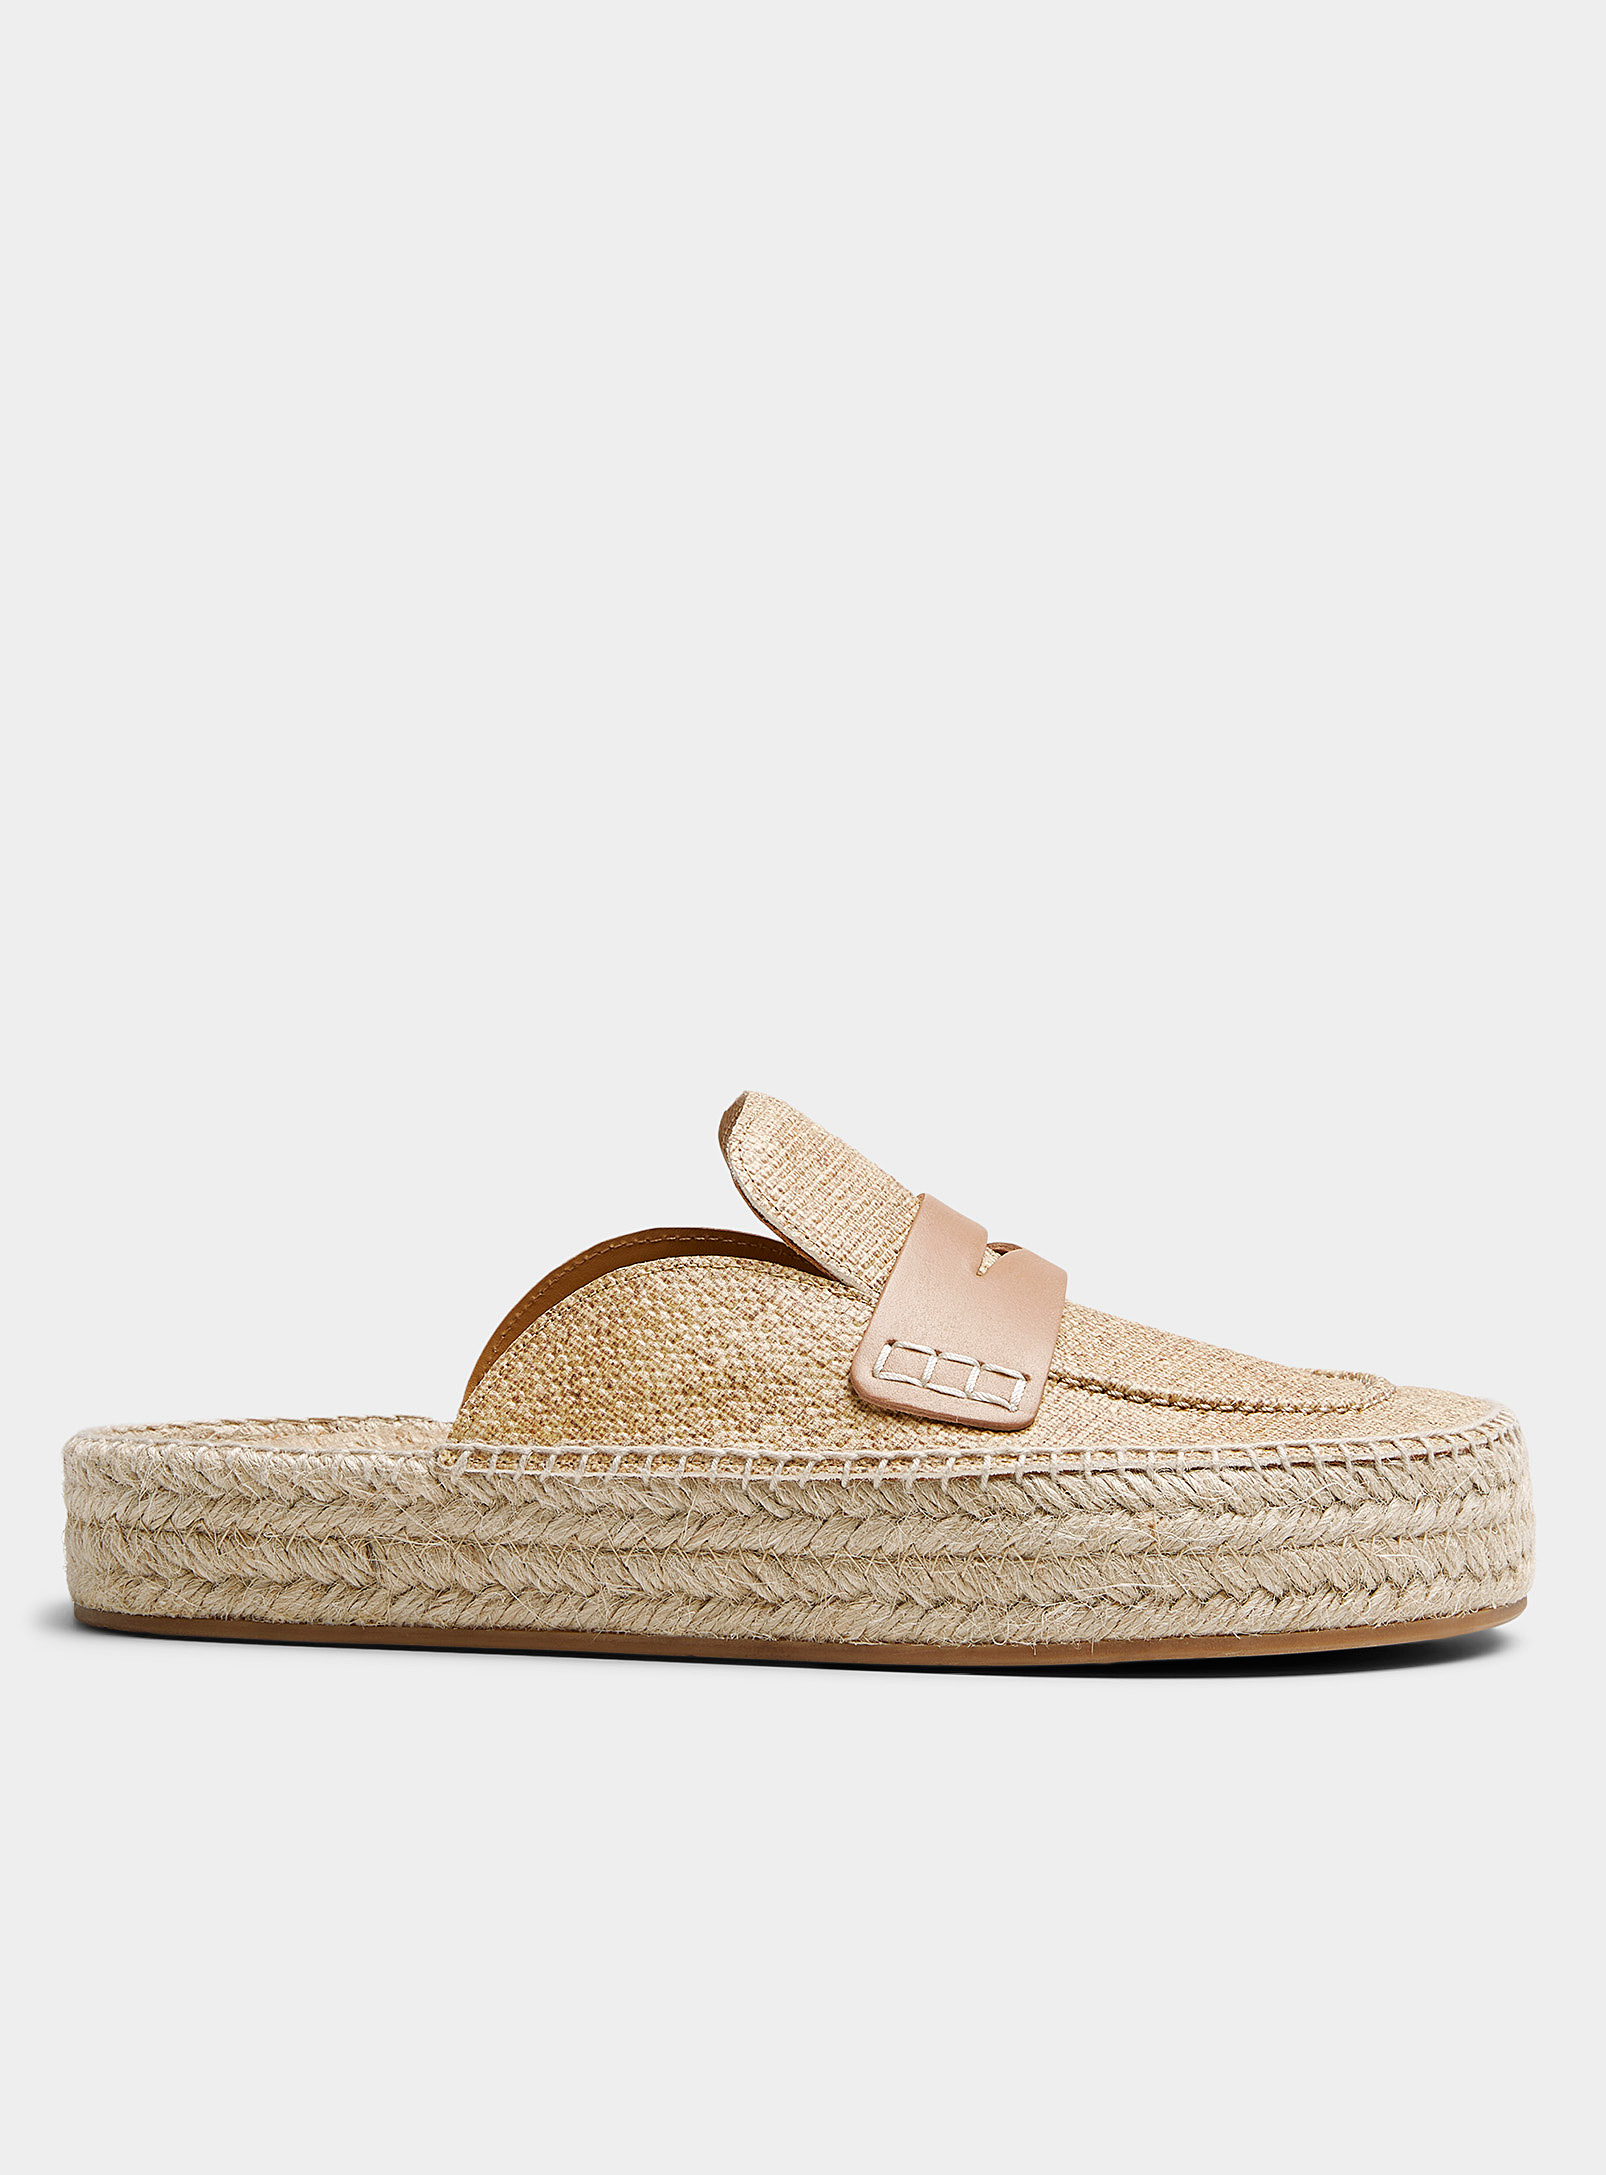 Jw Anderson Leather Espadrille Loafer Mules In Cream Beige